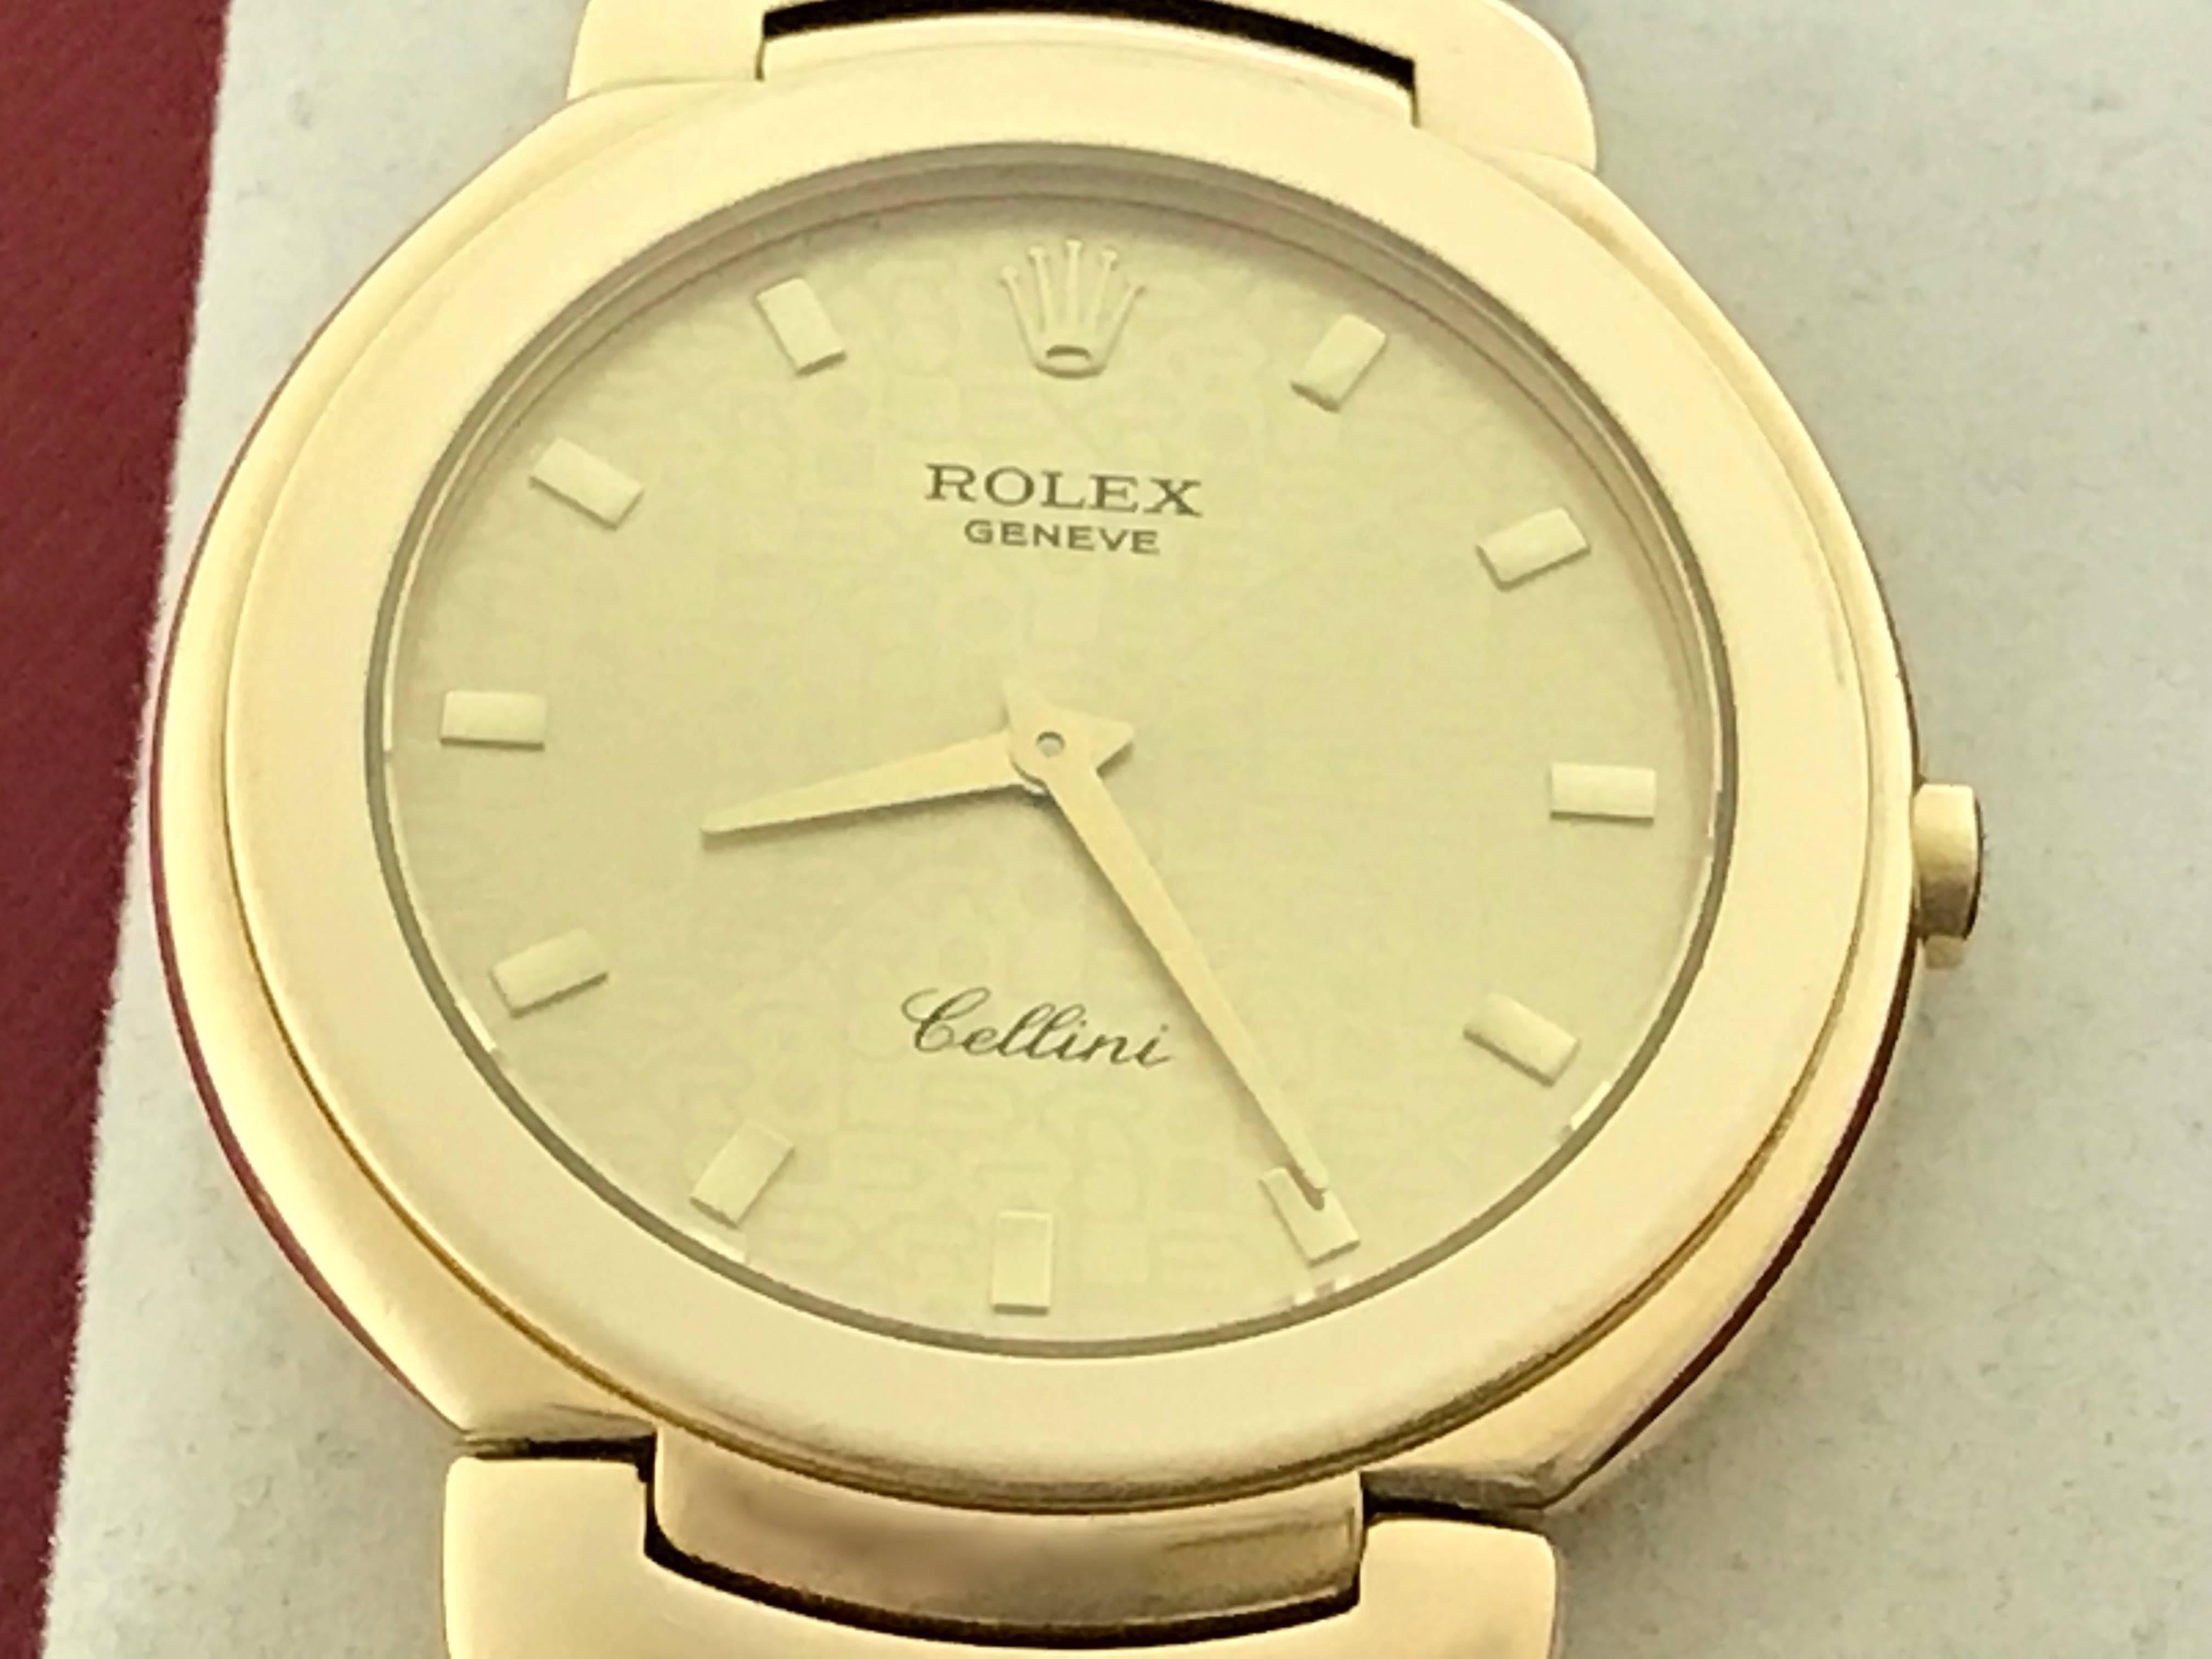 The Rolex Cellini Model 6823/8 pre-owned quartz wrist watch. Featuring a Champagne Rolex Jubilee Dial with yellow gold hour markers. 18k Yellow Gold round style case (36mm). Comes with a strap band and 18k Yellow Gold Rolex deployant clasp, box,